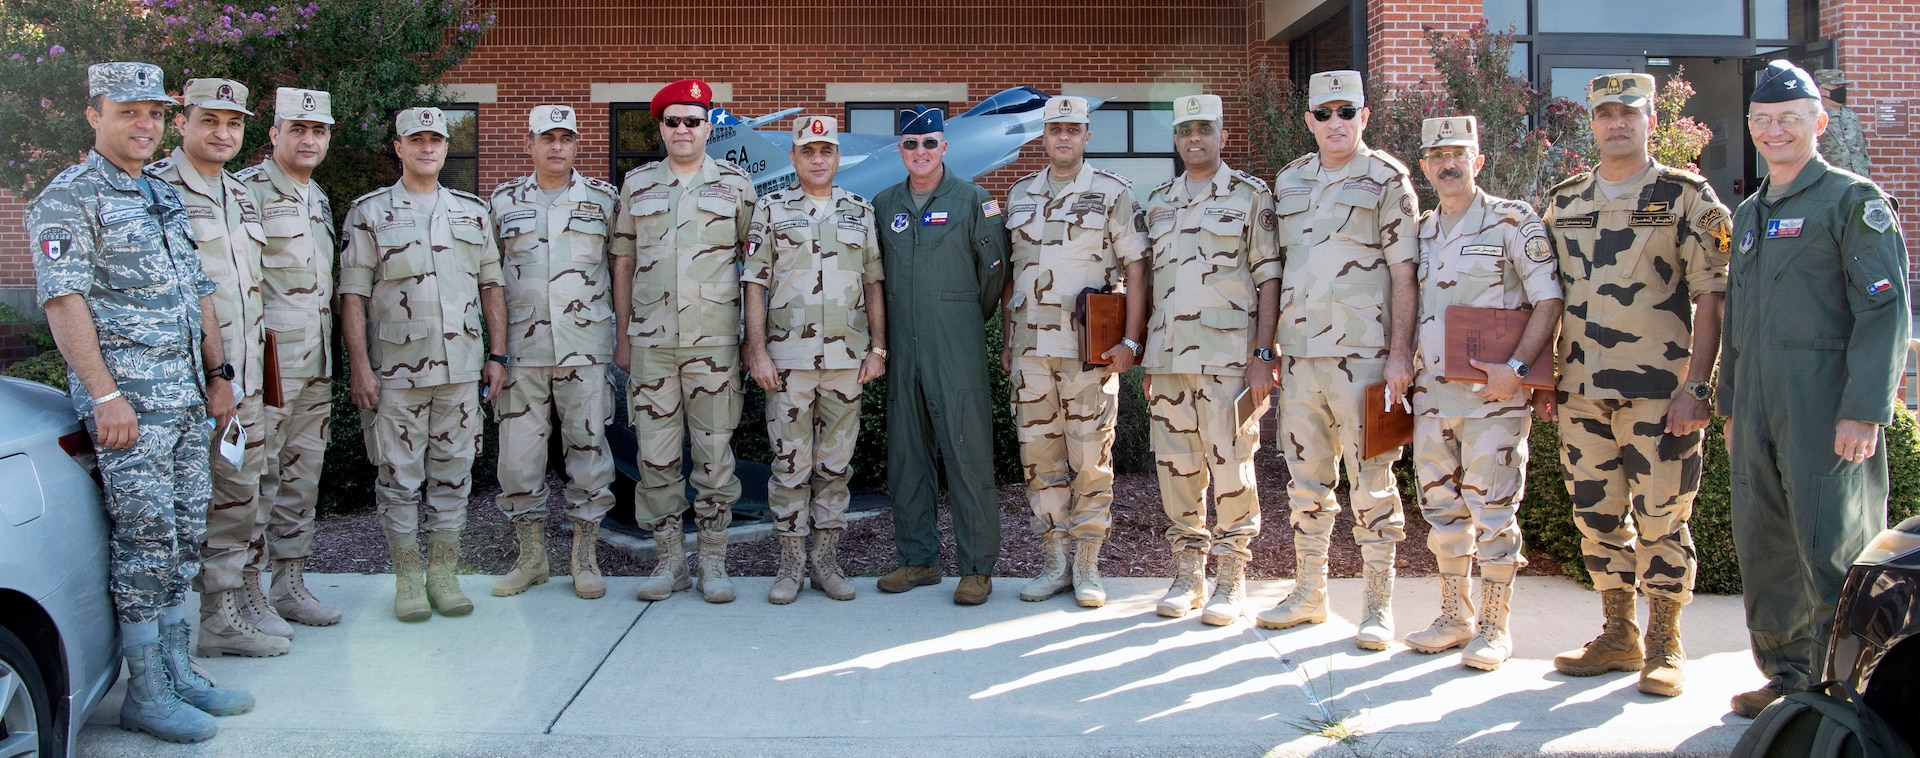 Members of Egypt’s Air Force made a trip to the 149th Fighter Wing at Joint Base San Antonio-Lackland Sept. 26